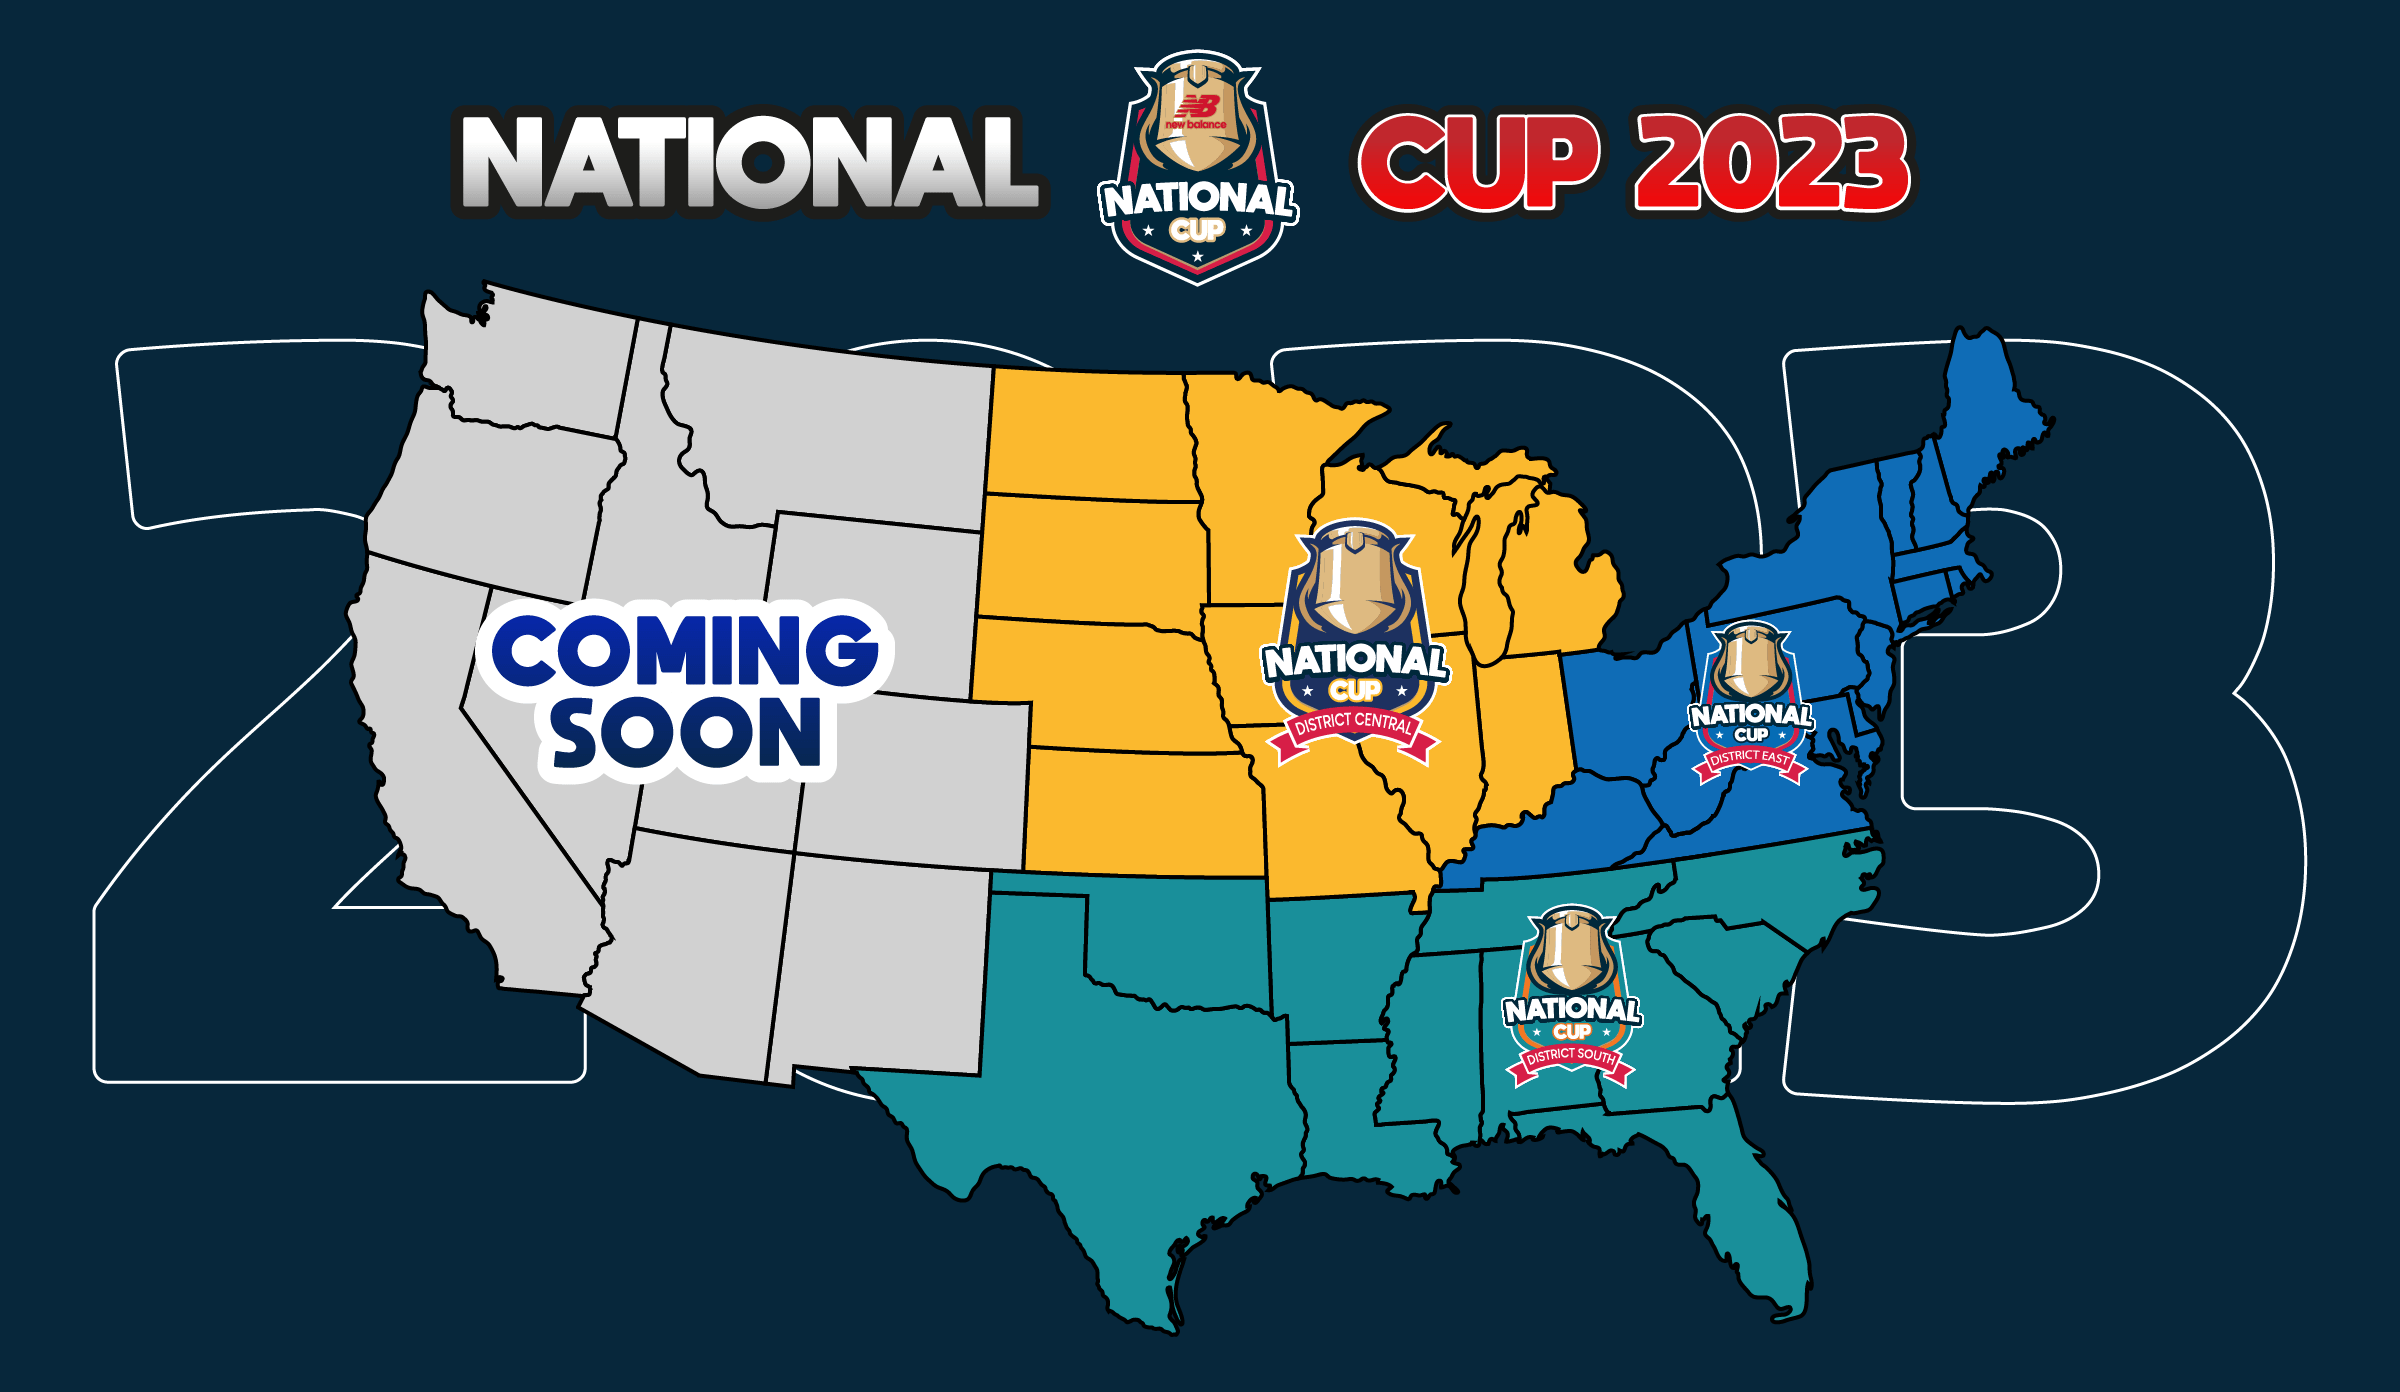 2023 National Cup Map